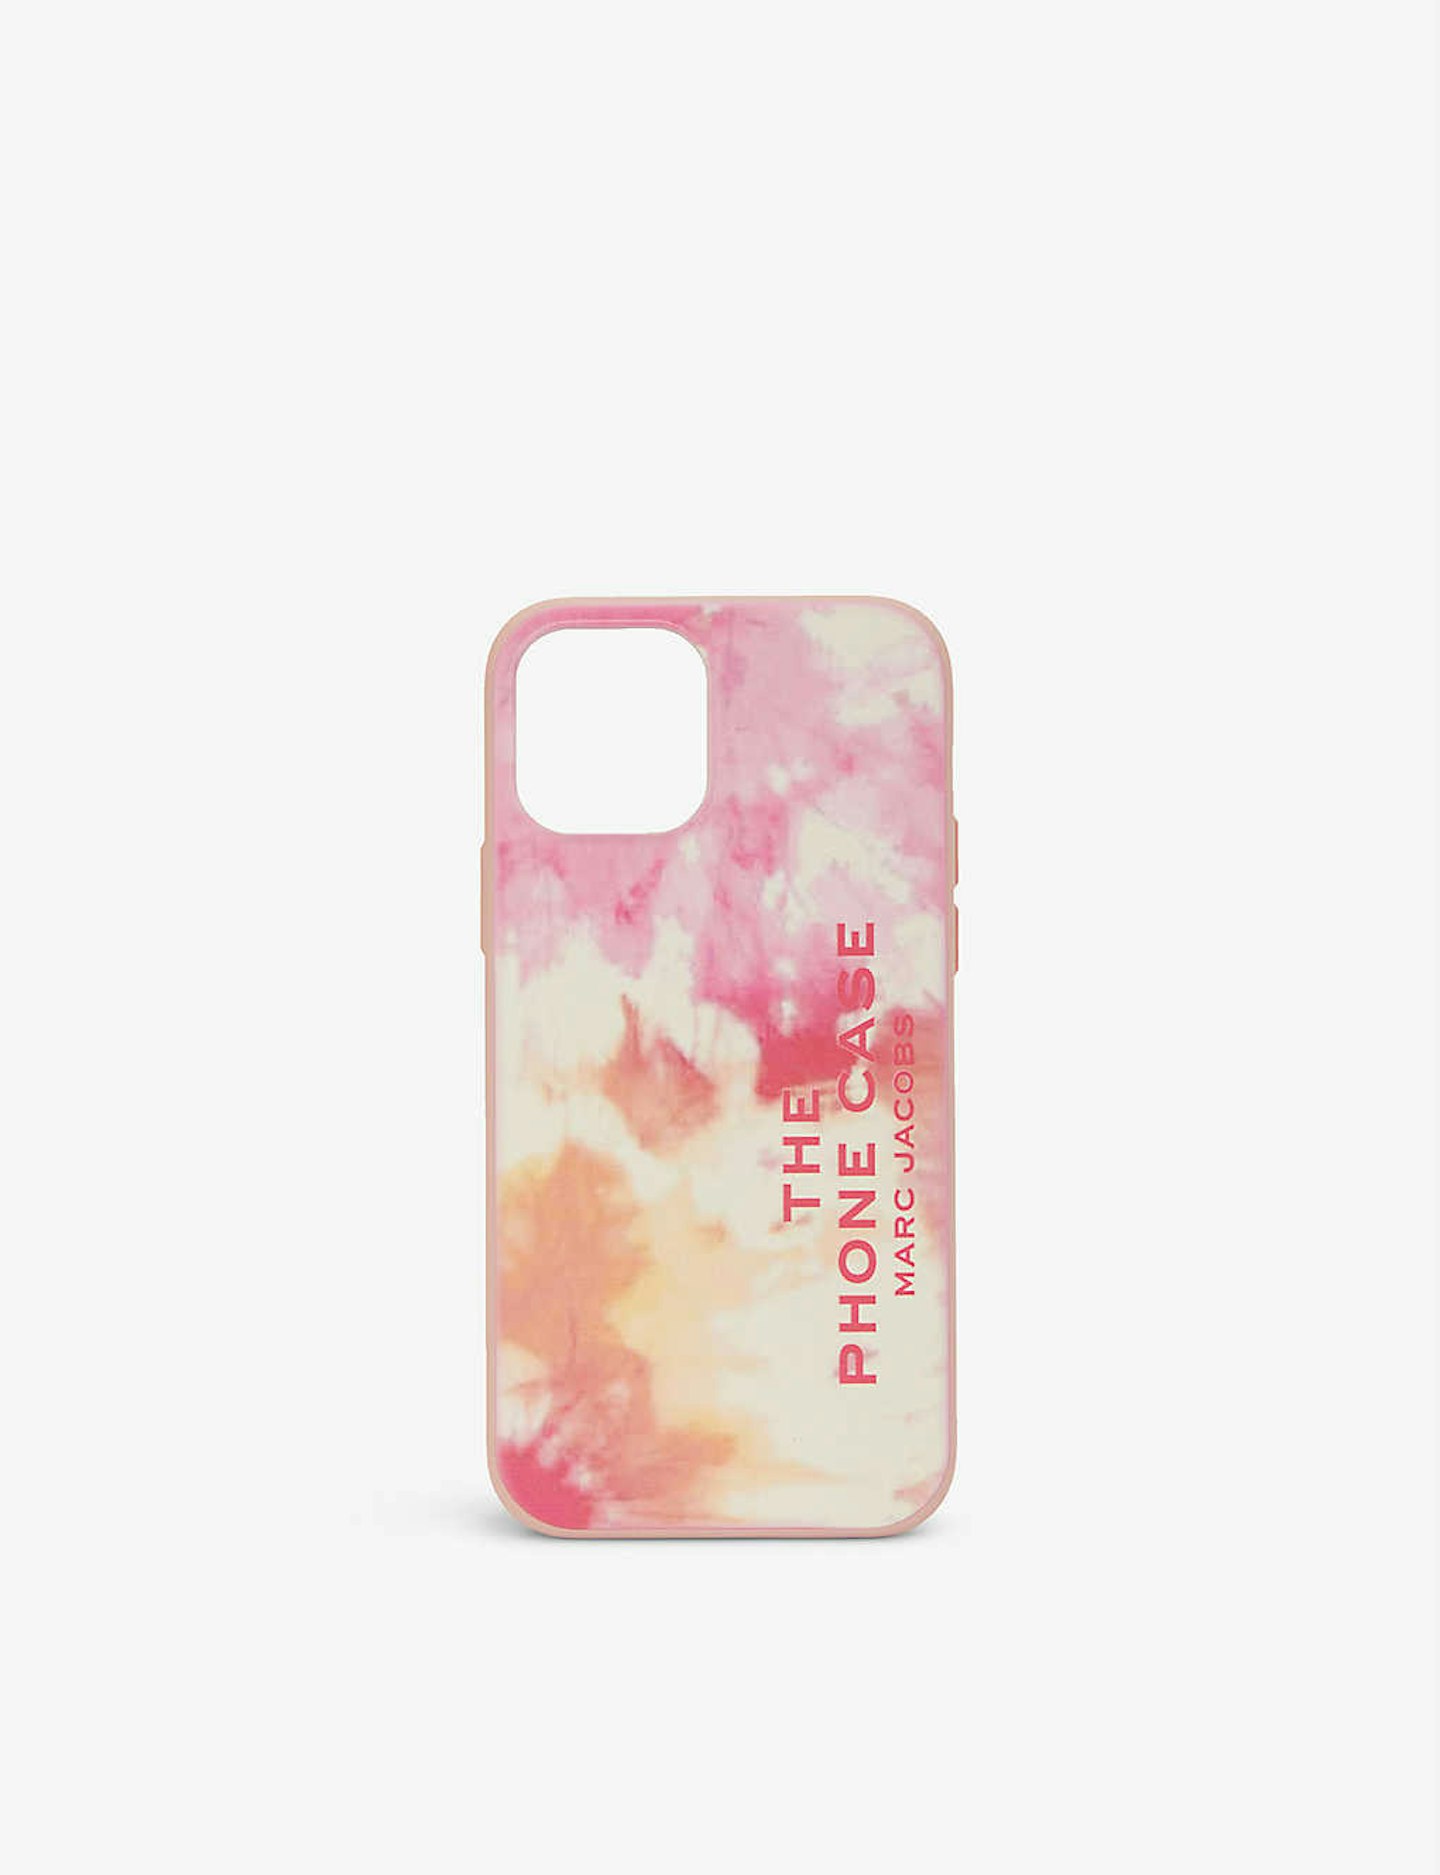 Marc Jacobs, Tie-dye silicone iPhone 12 Pro Max phone case, £60